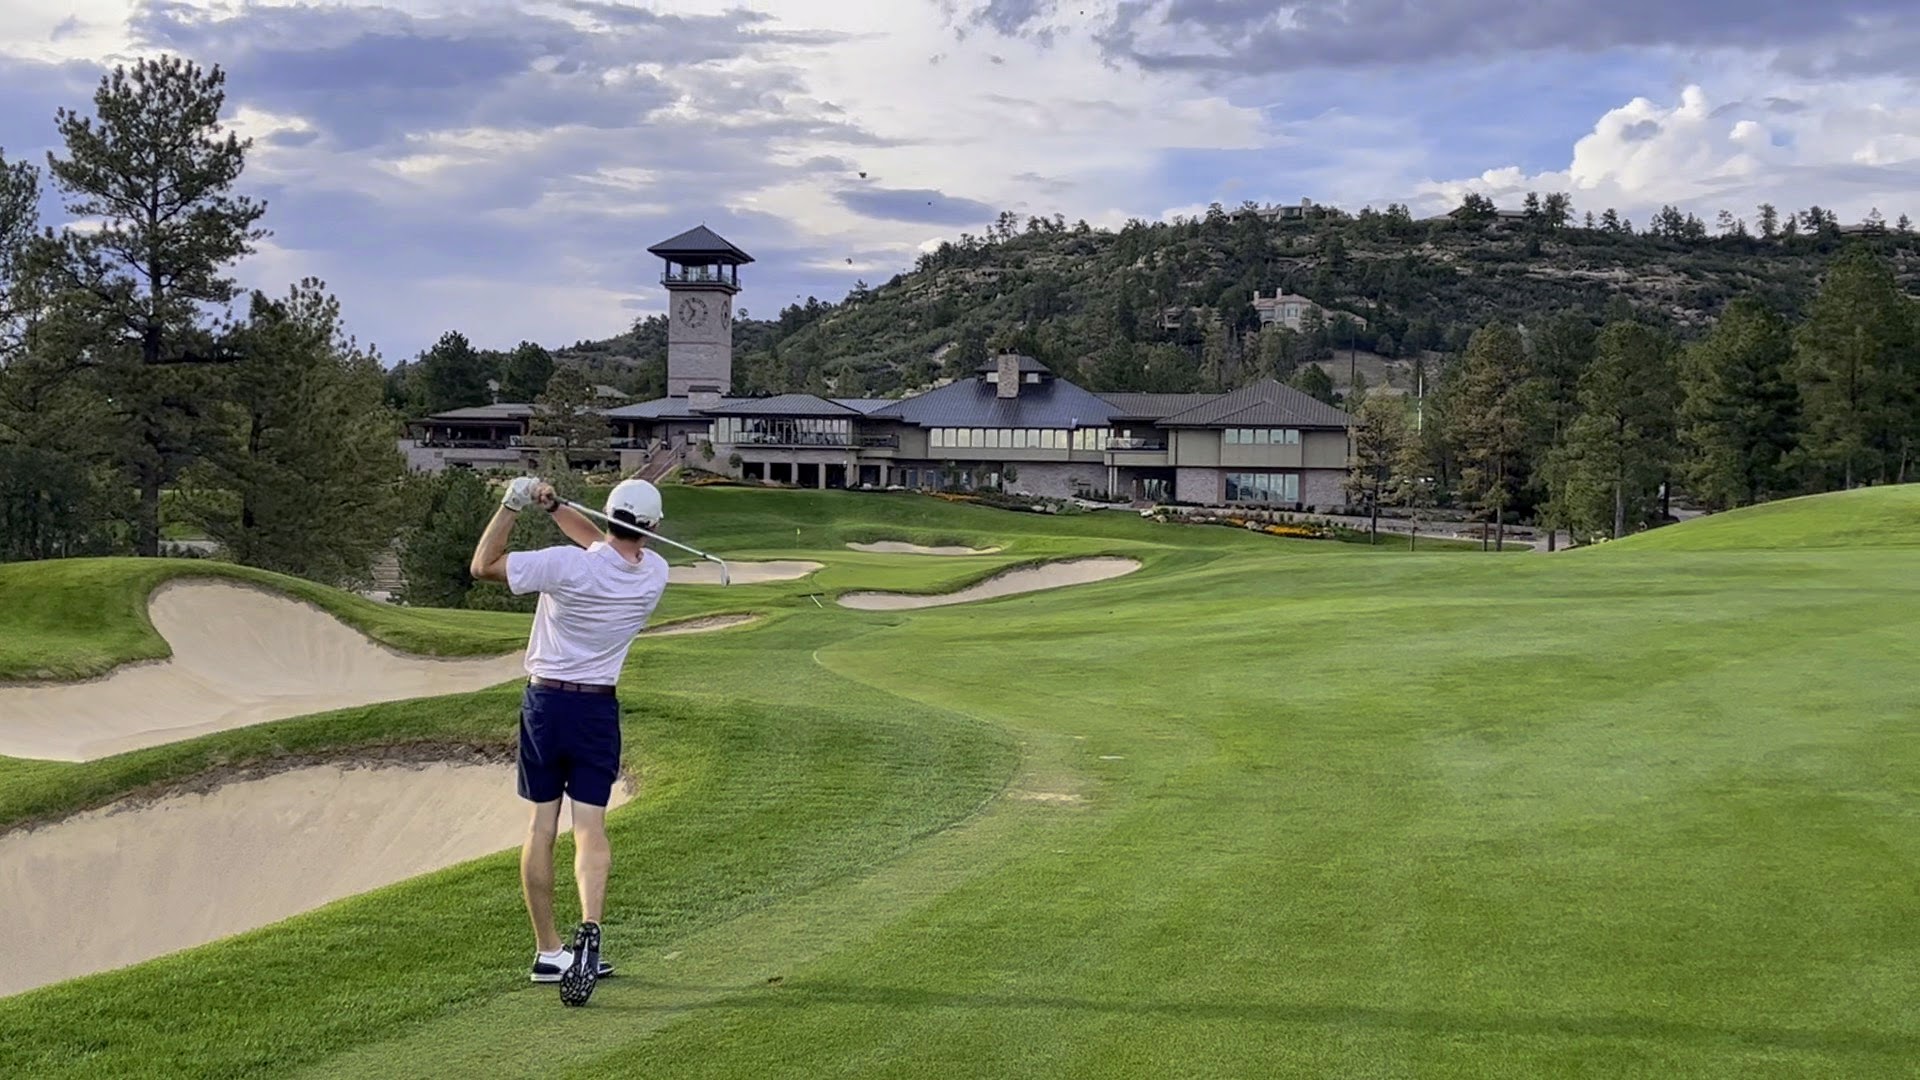 “I played some of the best golf in my life this summer,” Weiss said. “Thanks to my boss, me and my dad got to play at Castle Pines Golf Club, one of the more exclusive courses in the state that will host the BMW Championship in 2024. It was awesome!”